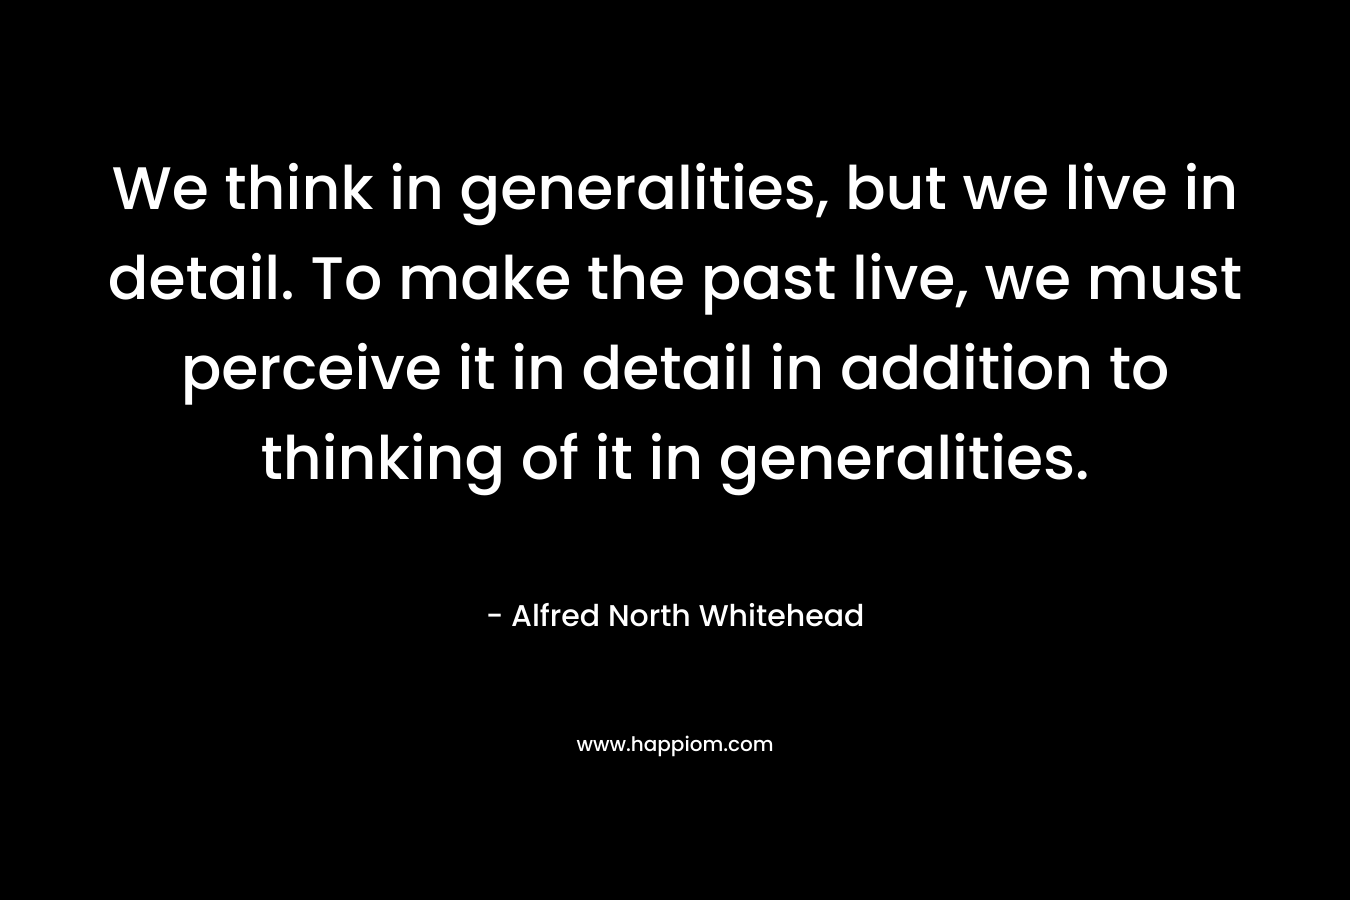 We think in generalities, but we live in detail. To make the past live, we must perceive it in detail in addition to thinking of it in generalities. – Alfred North Whitehead